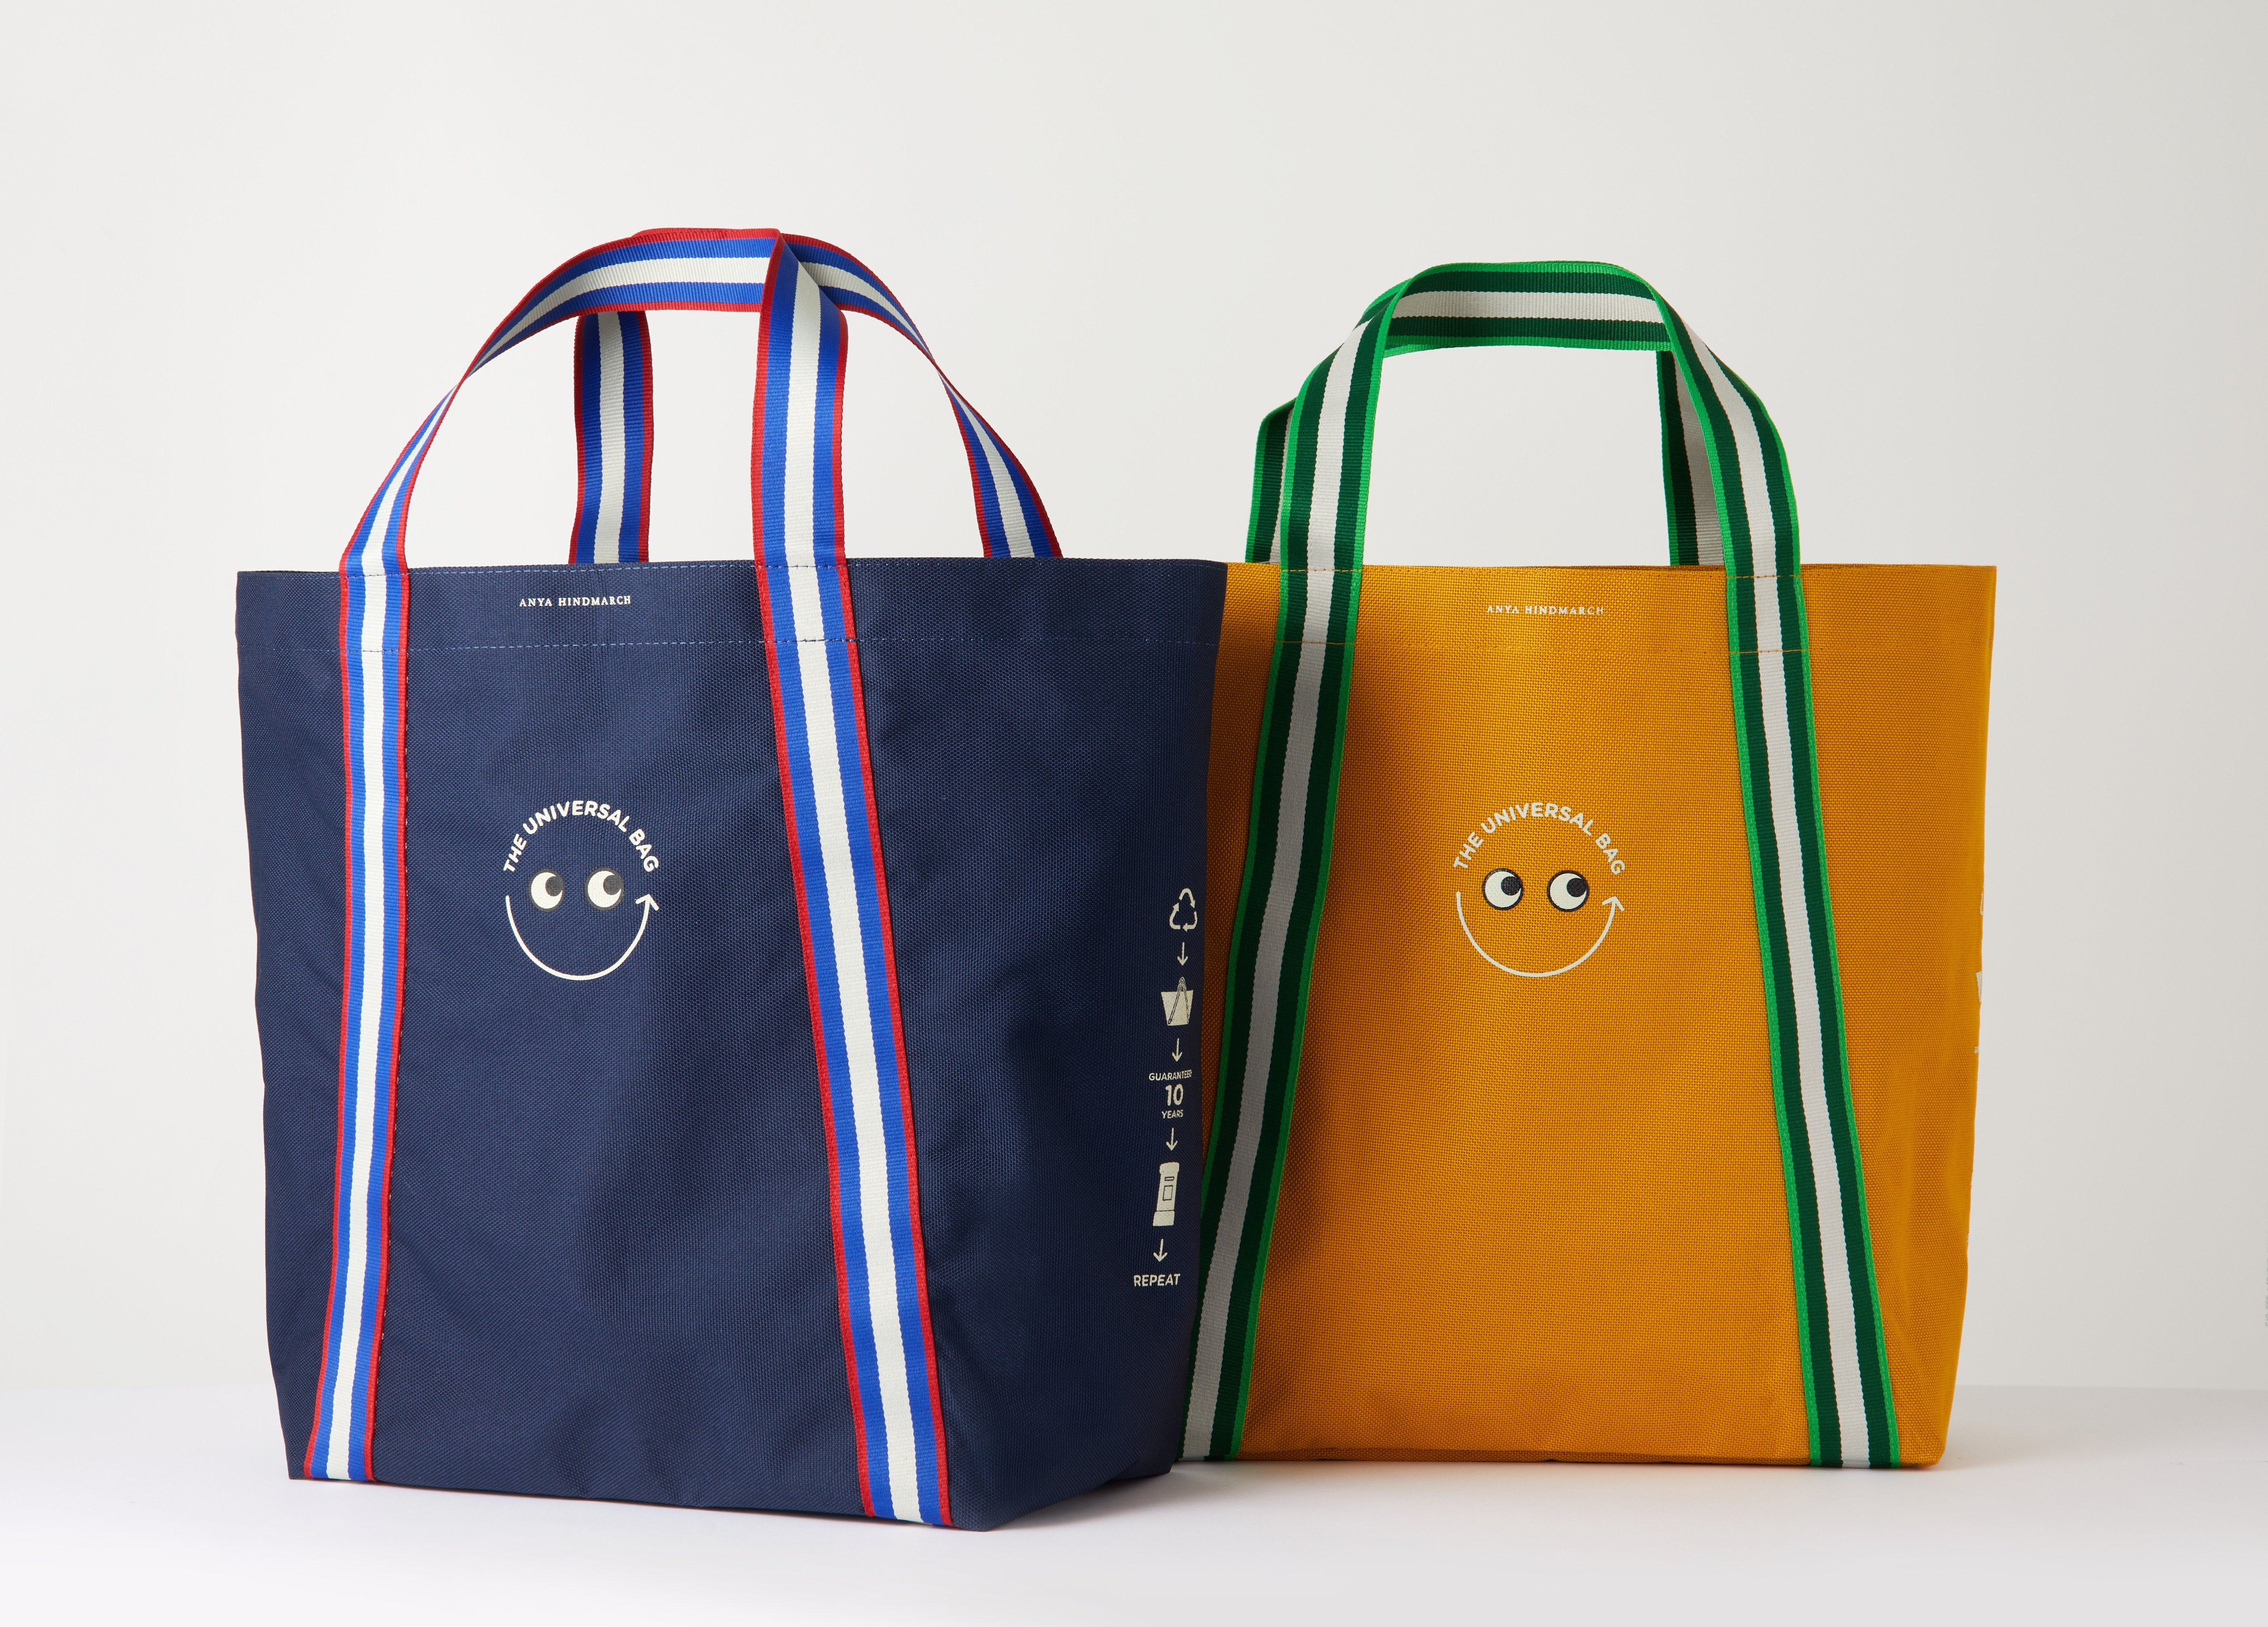 Anya Hindmarch to launch the Universal Bag in collaboration with